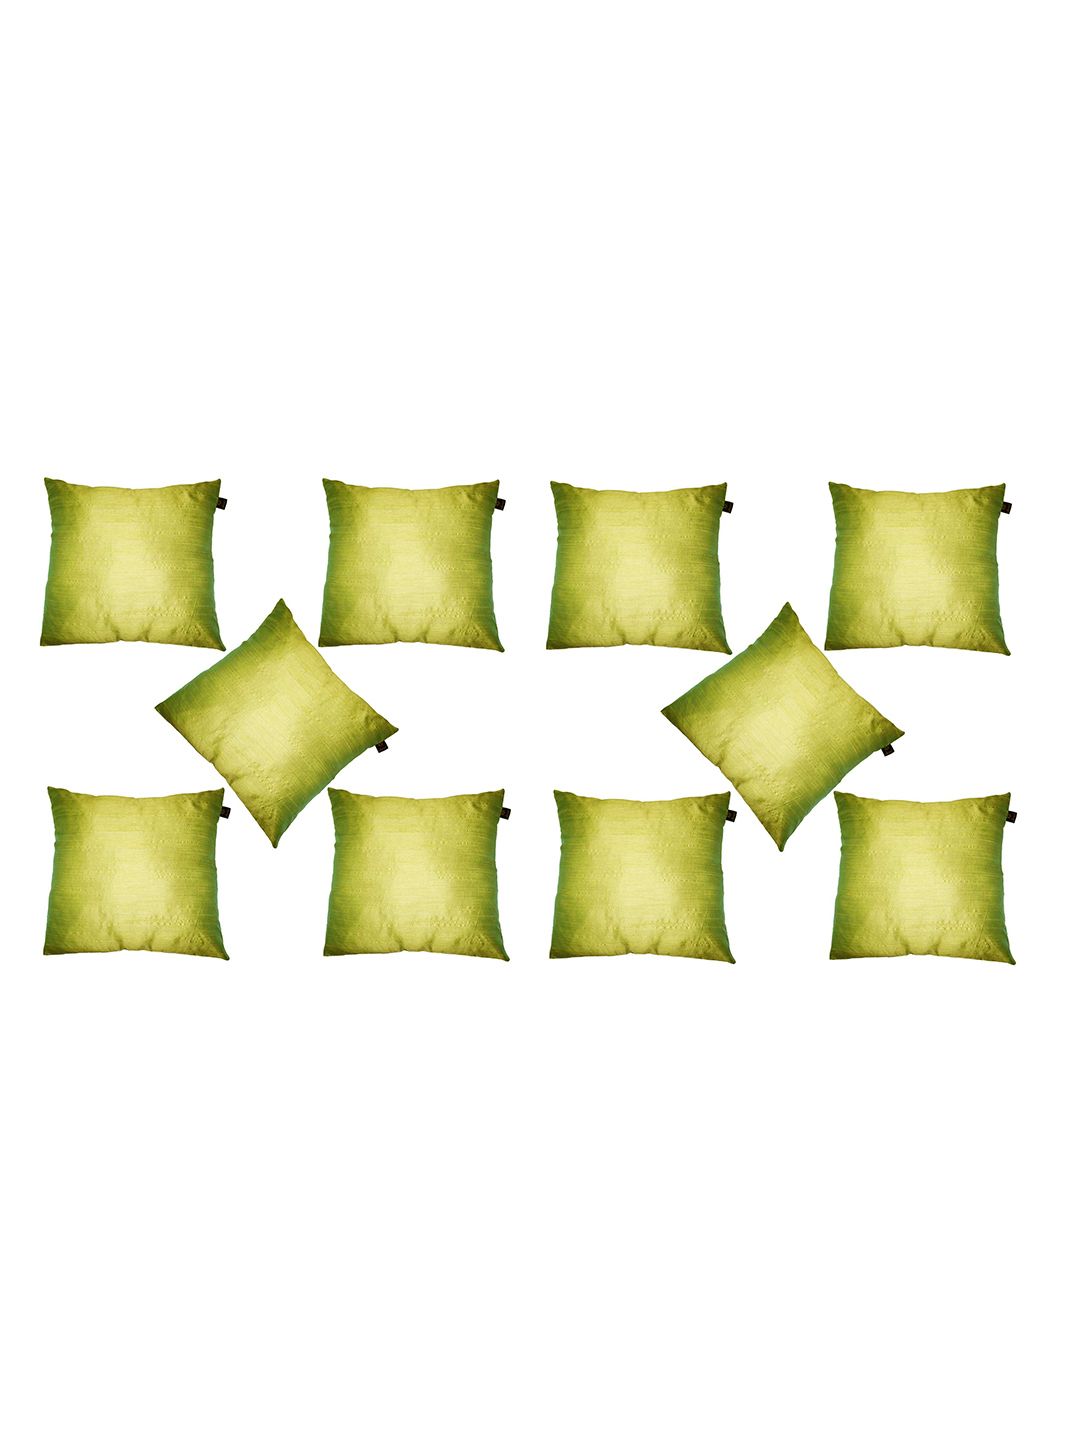 Lushomes Set of 10 Green Dupion Silk Square Cushion Covers Price in India